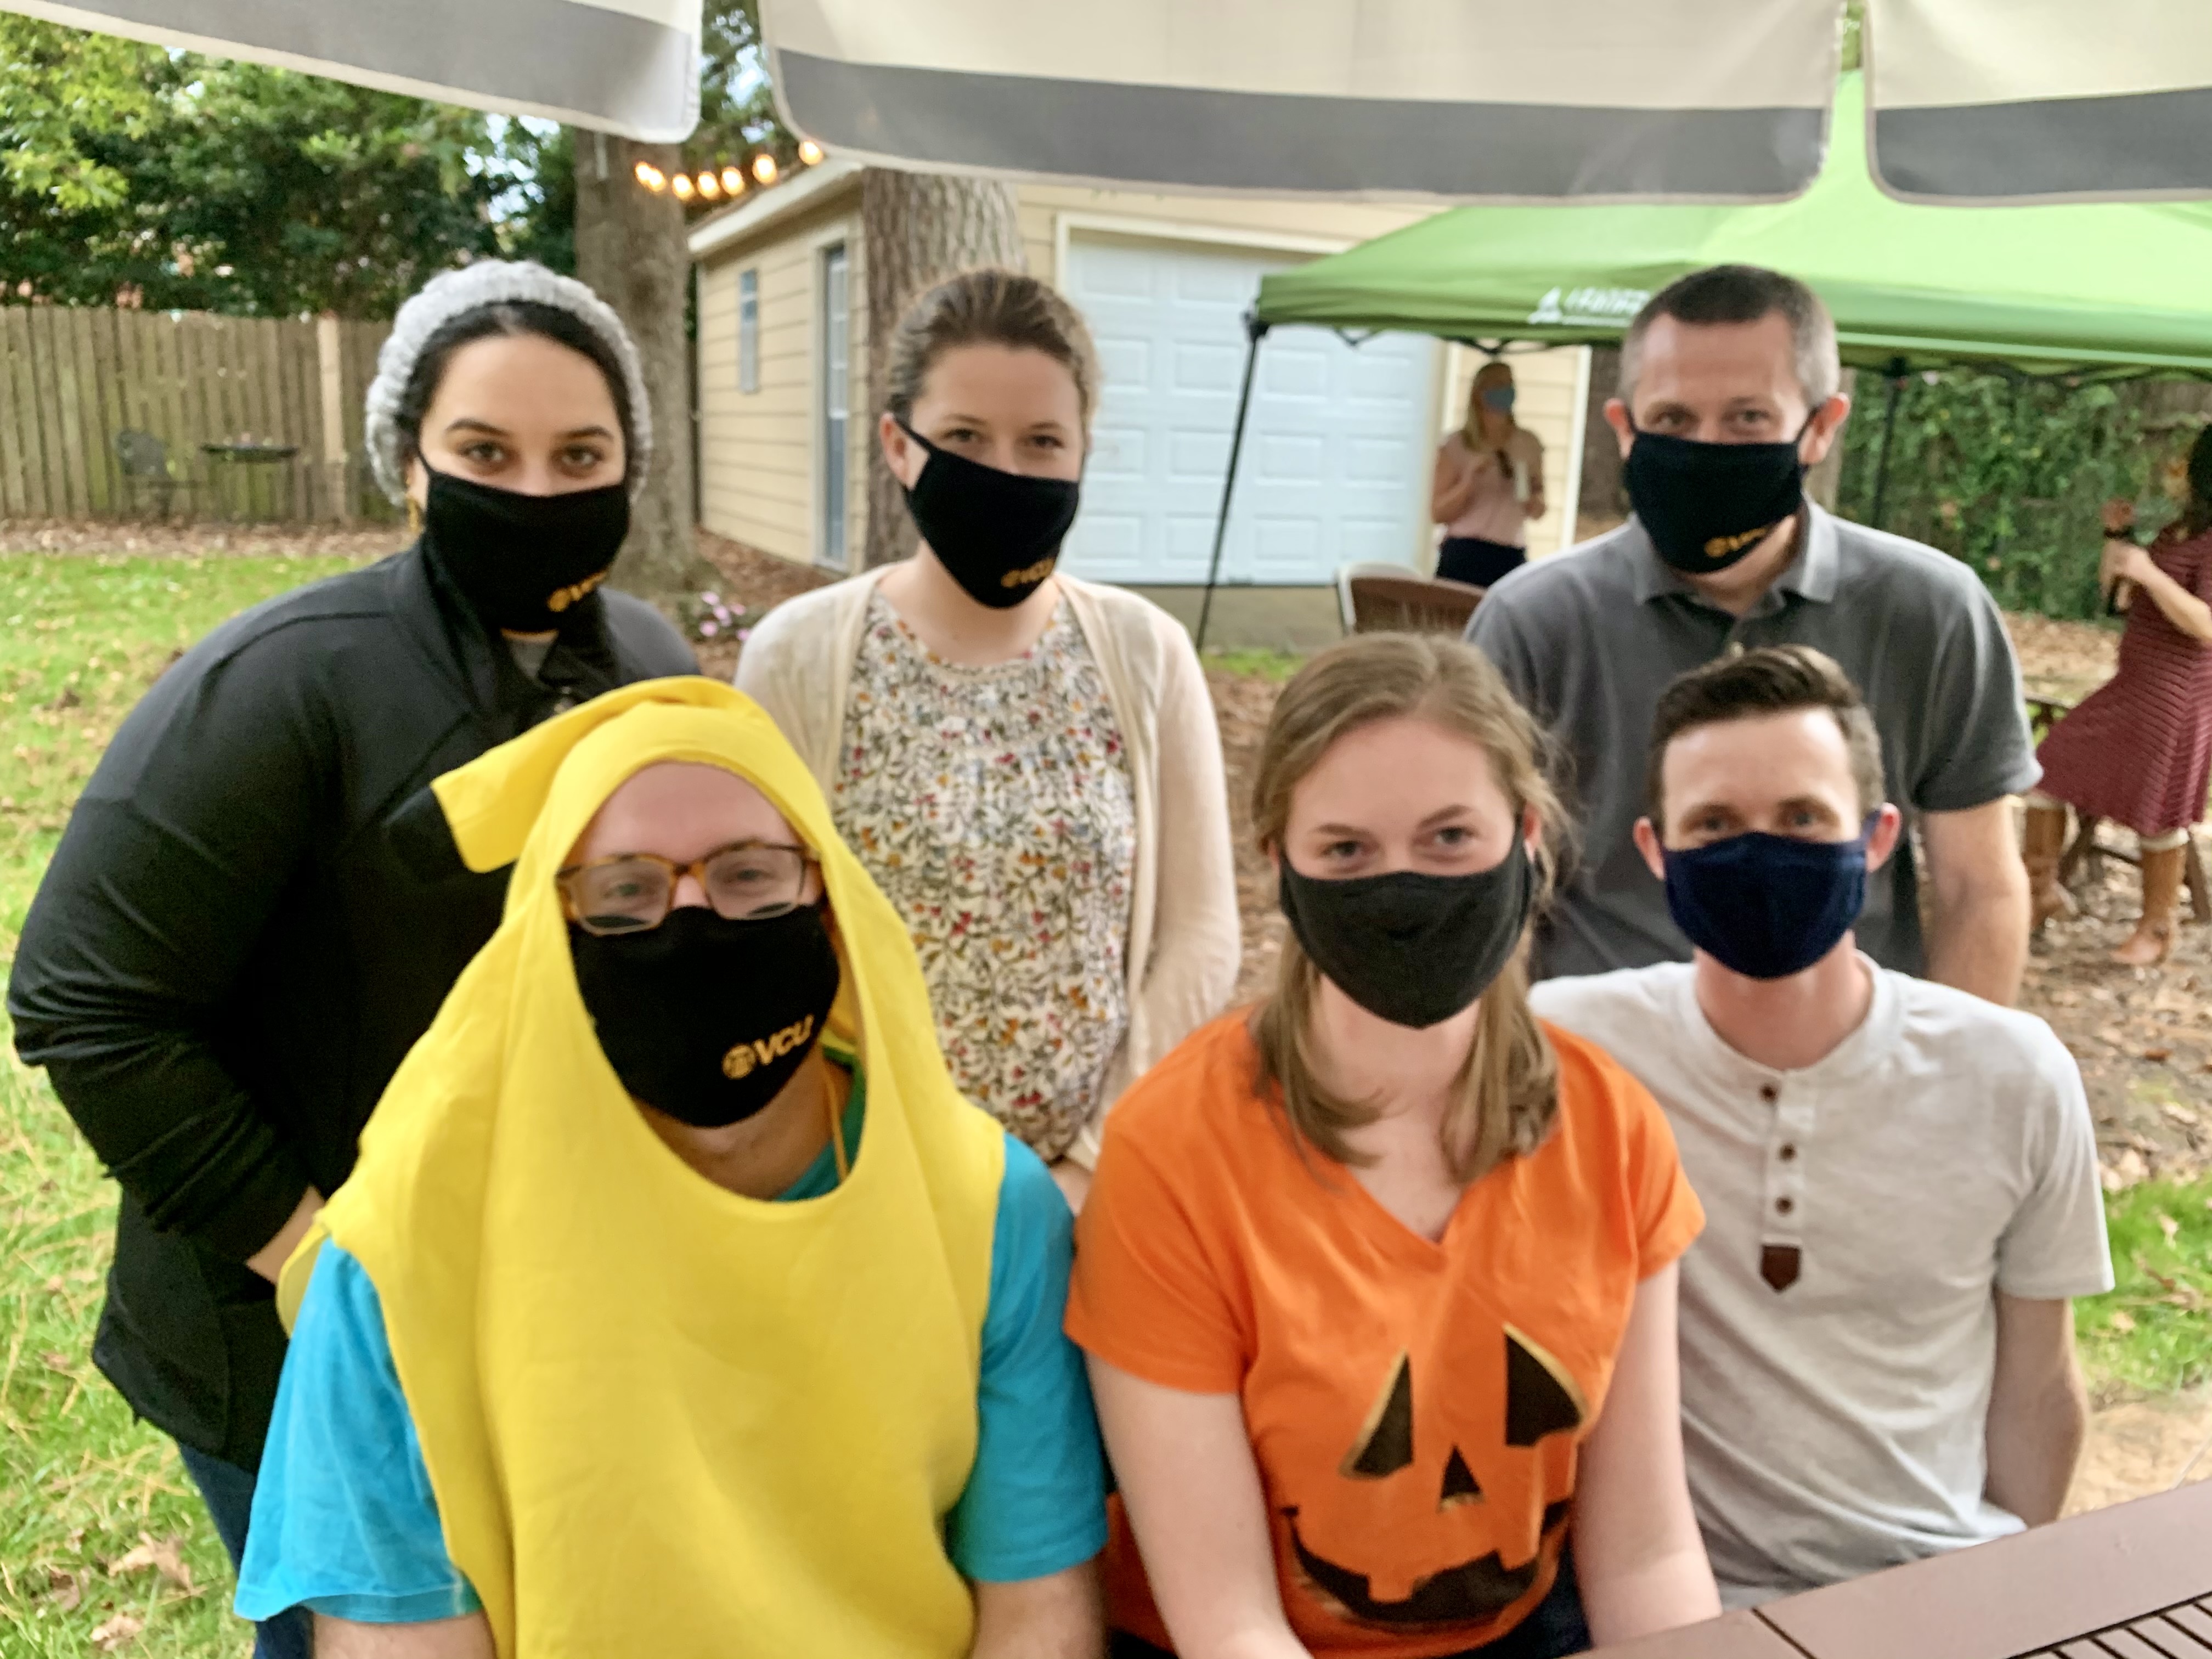 masked residents in Halloween costumes gather for a group photo